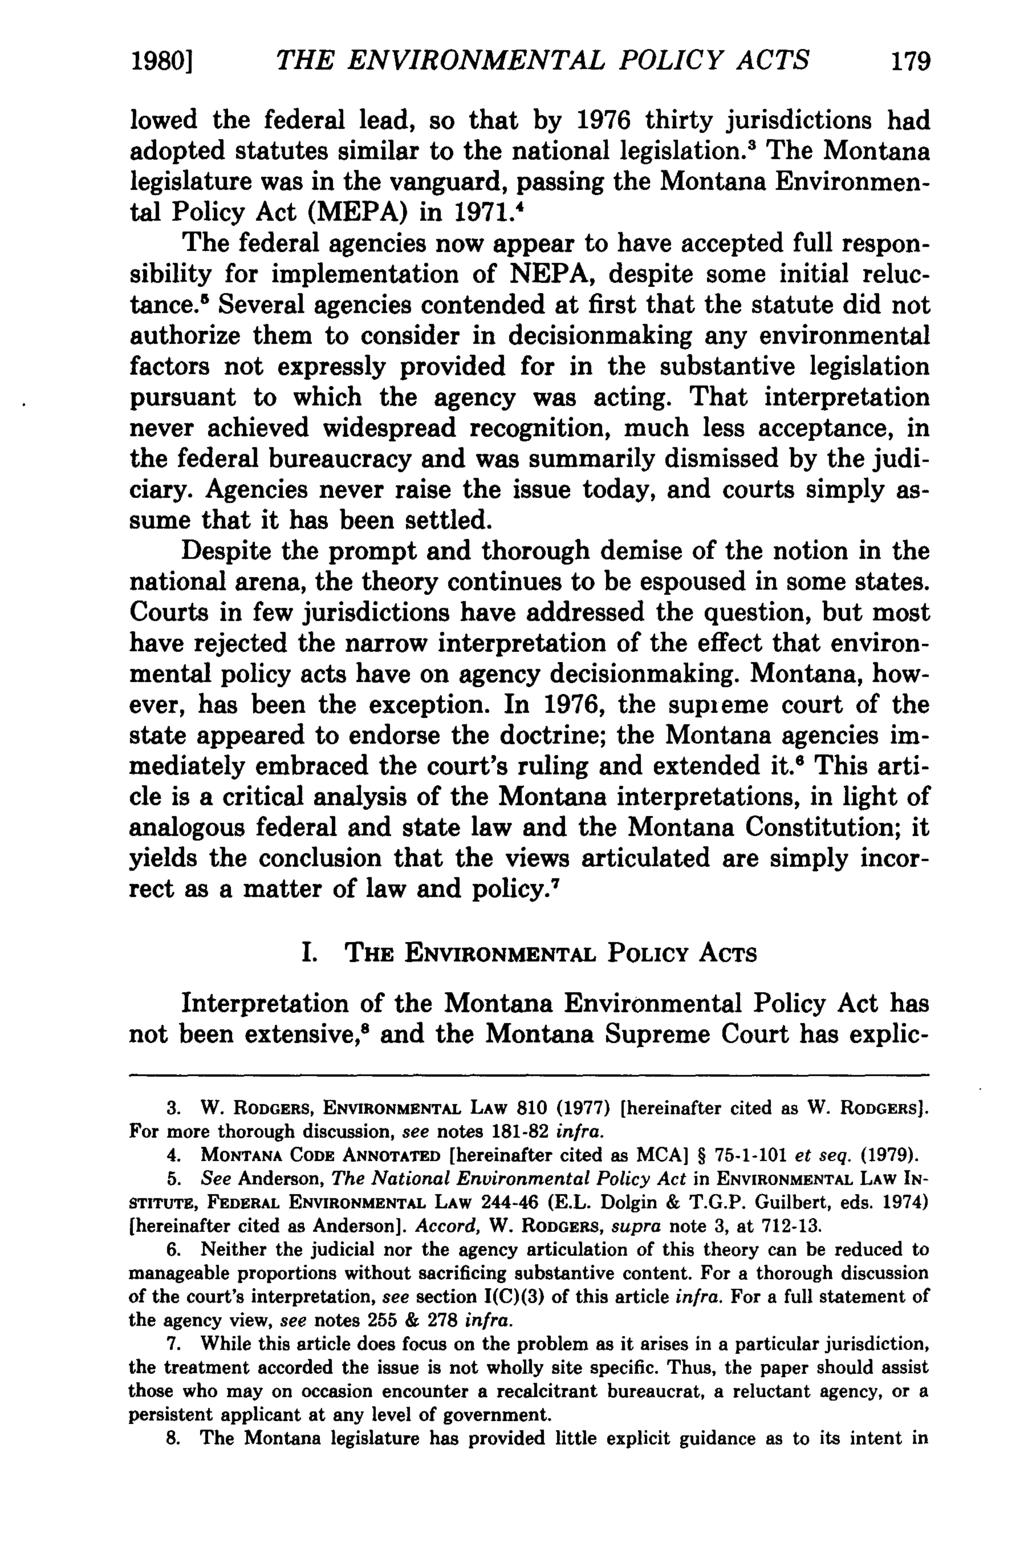 1980) THE ENVIRONMENTAL POLICY ACTS 179 lowed the federal lead, so that by 1976 thirty jurisdictions had adopted statutes similar to the national legislation.